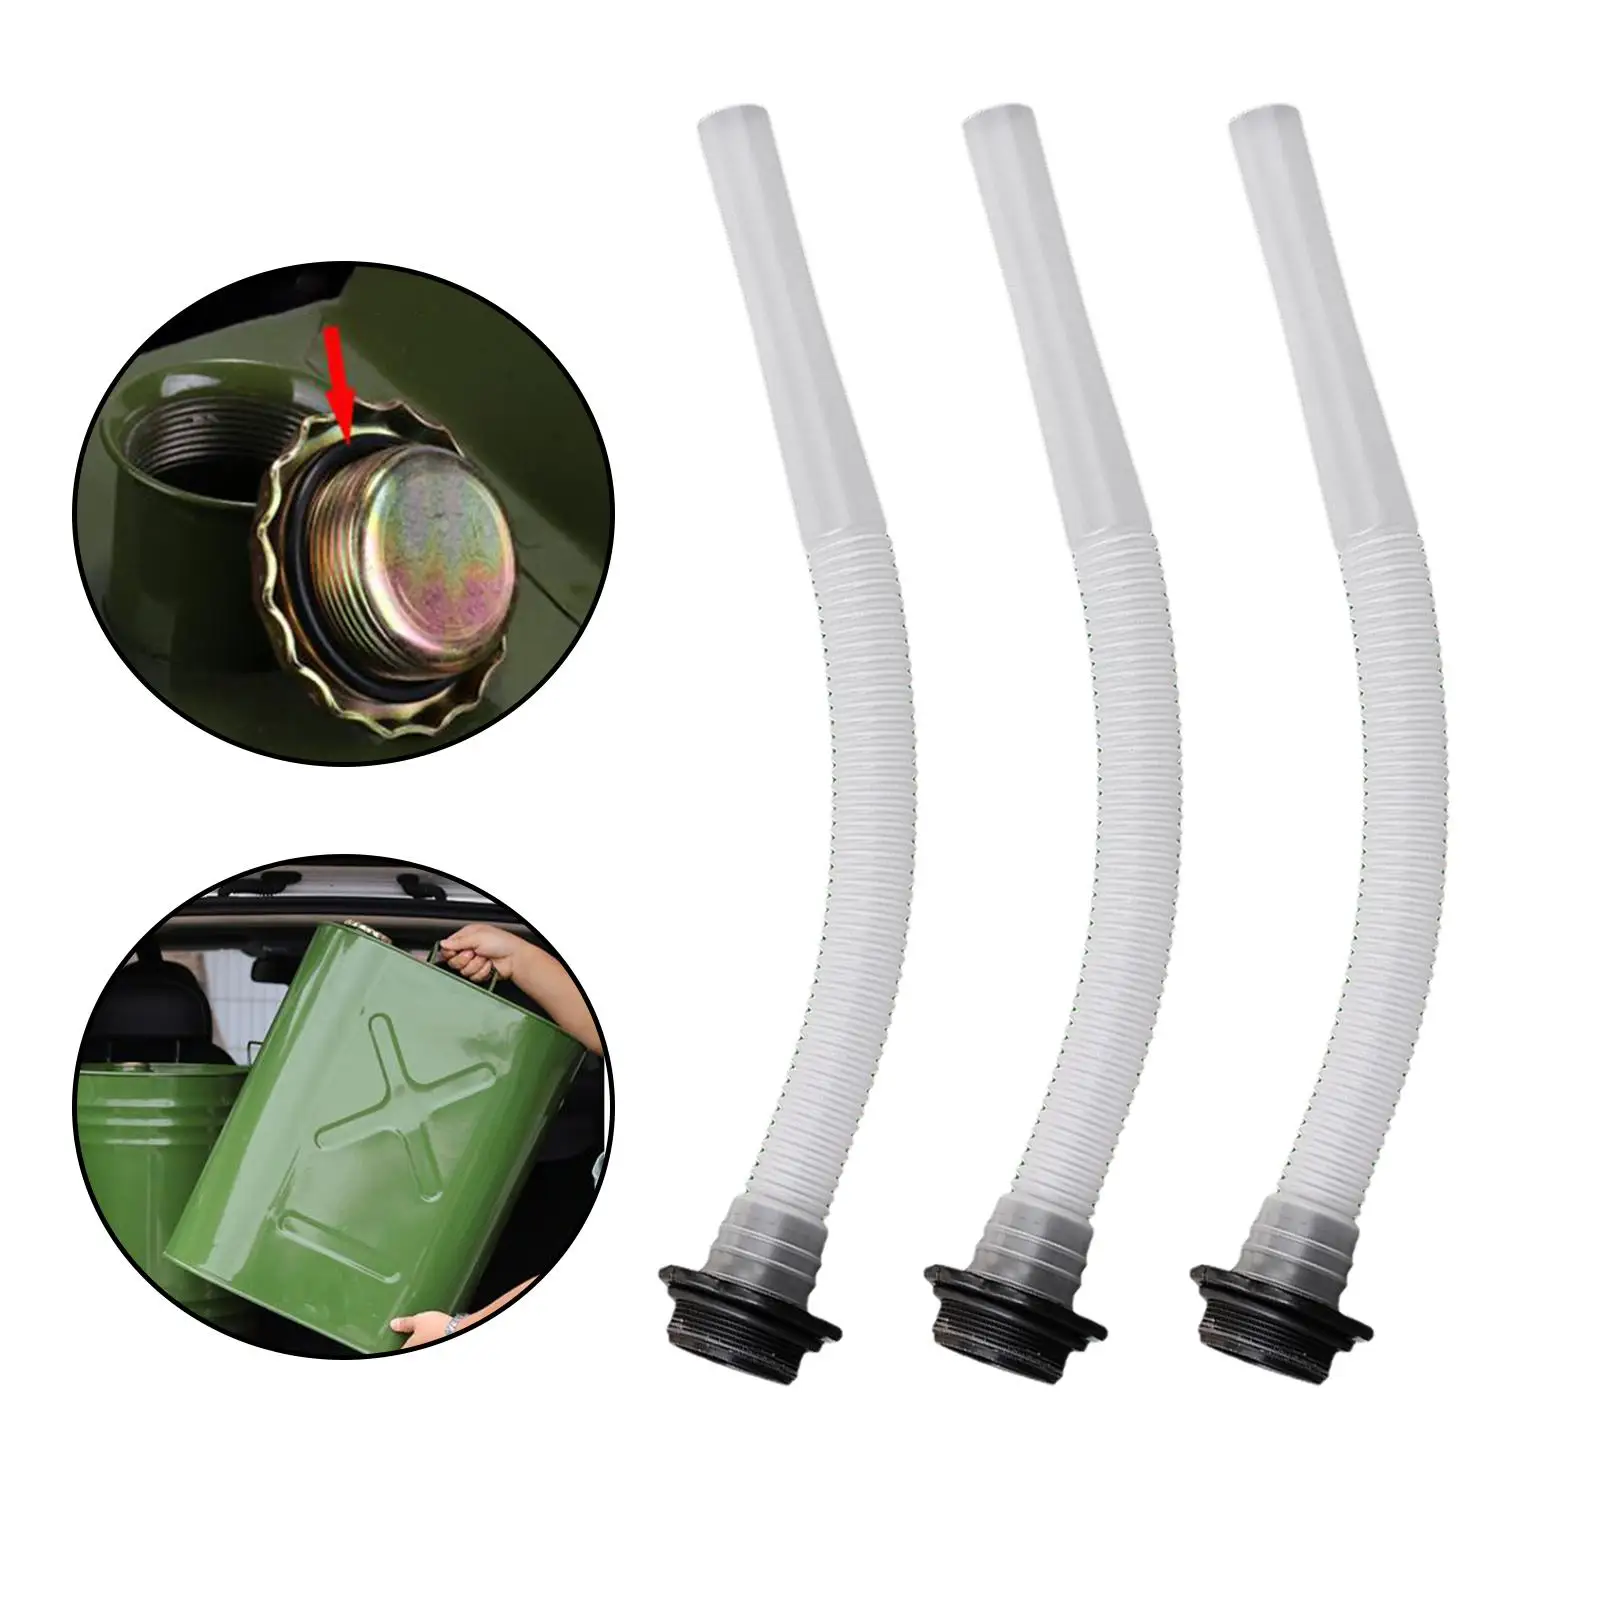 3Pcs 13inch Fuel Tanks Pouring Nozzle Vehicle Equipment Motorcycle Accessories Garage Tool Leakproof Petrol Cans Flexible Tube